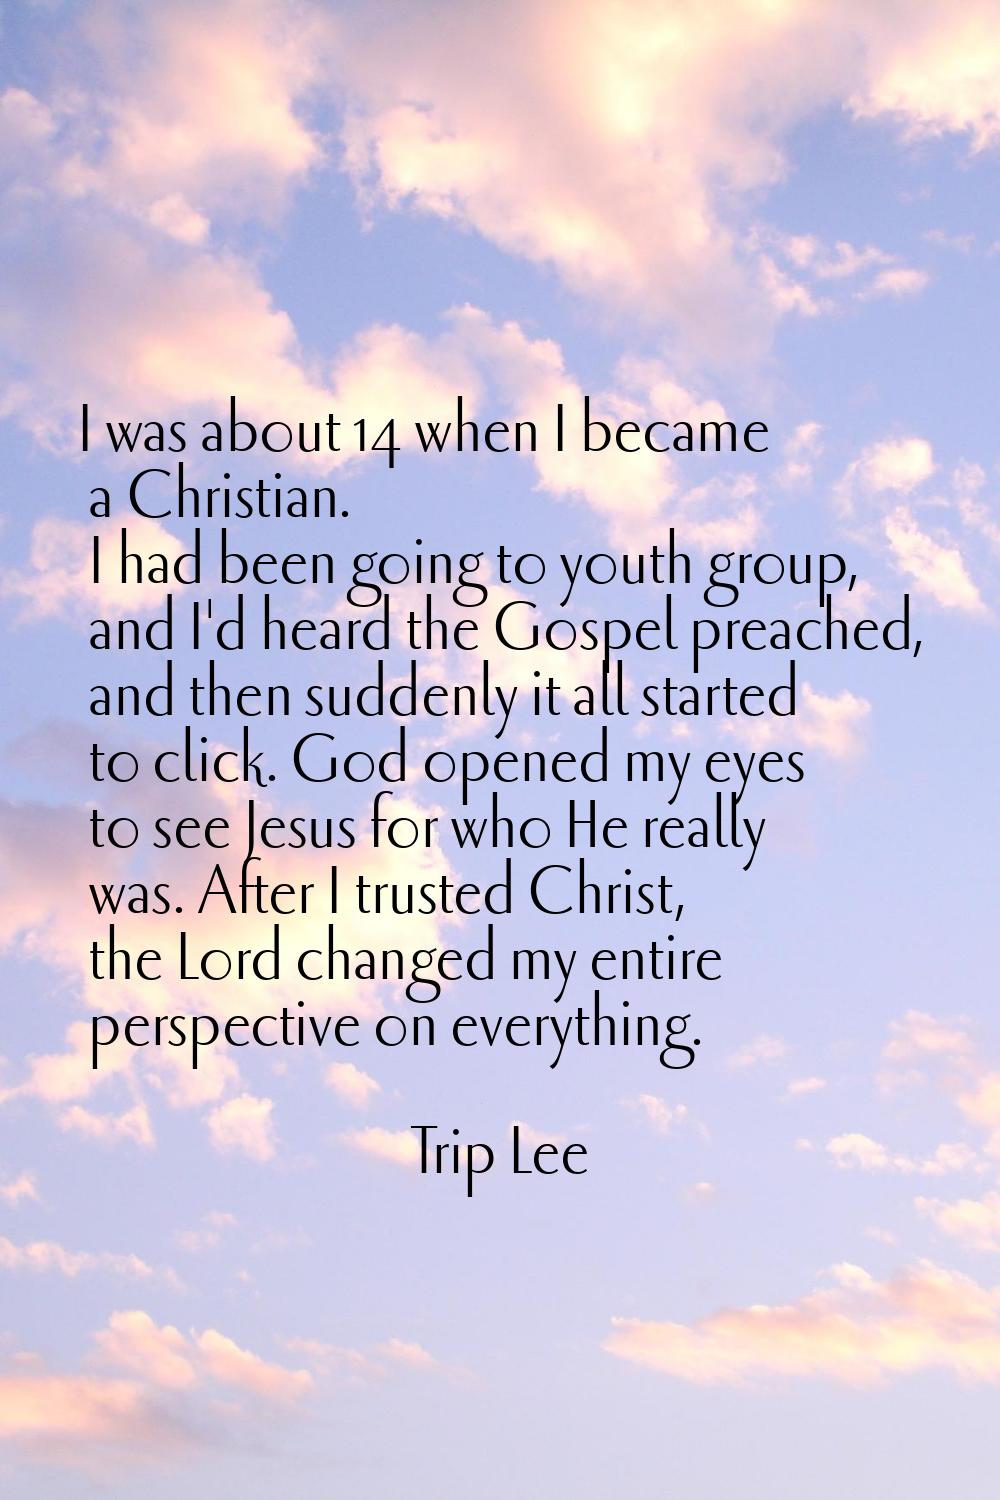 I was about 14 when I became a Christian. I had been going to youth group, and I'd heard the Gospel